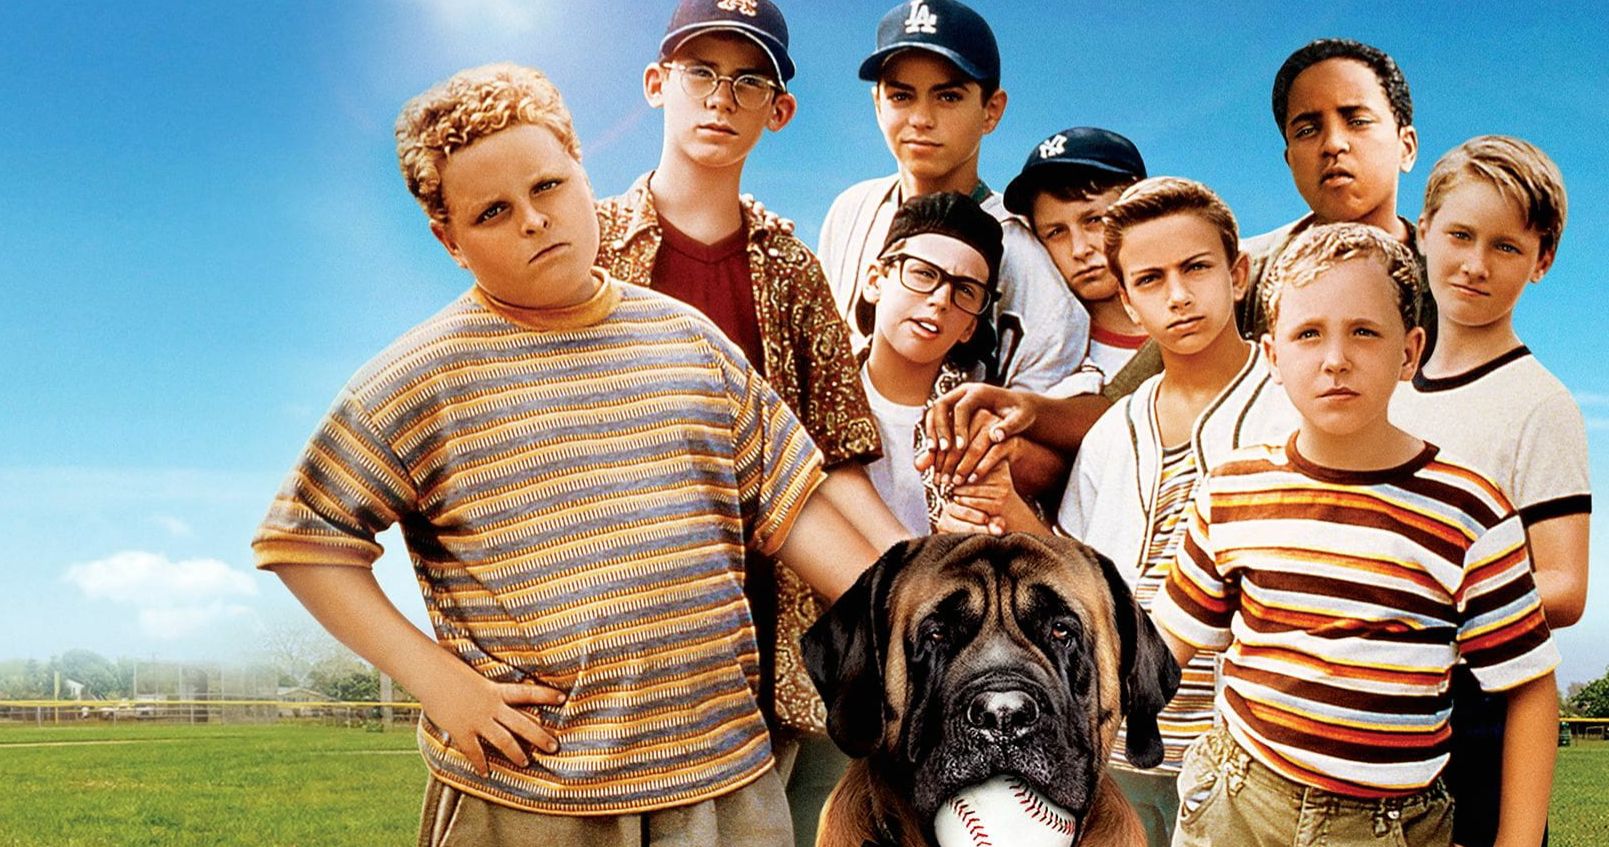 The Sandlot Fans Are Celebrating the Classic Baseball Movie's 28th Anniversary